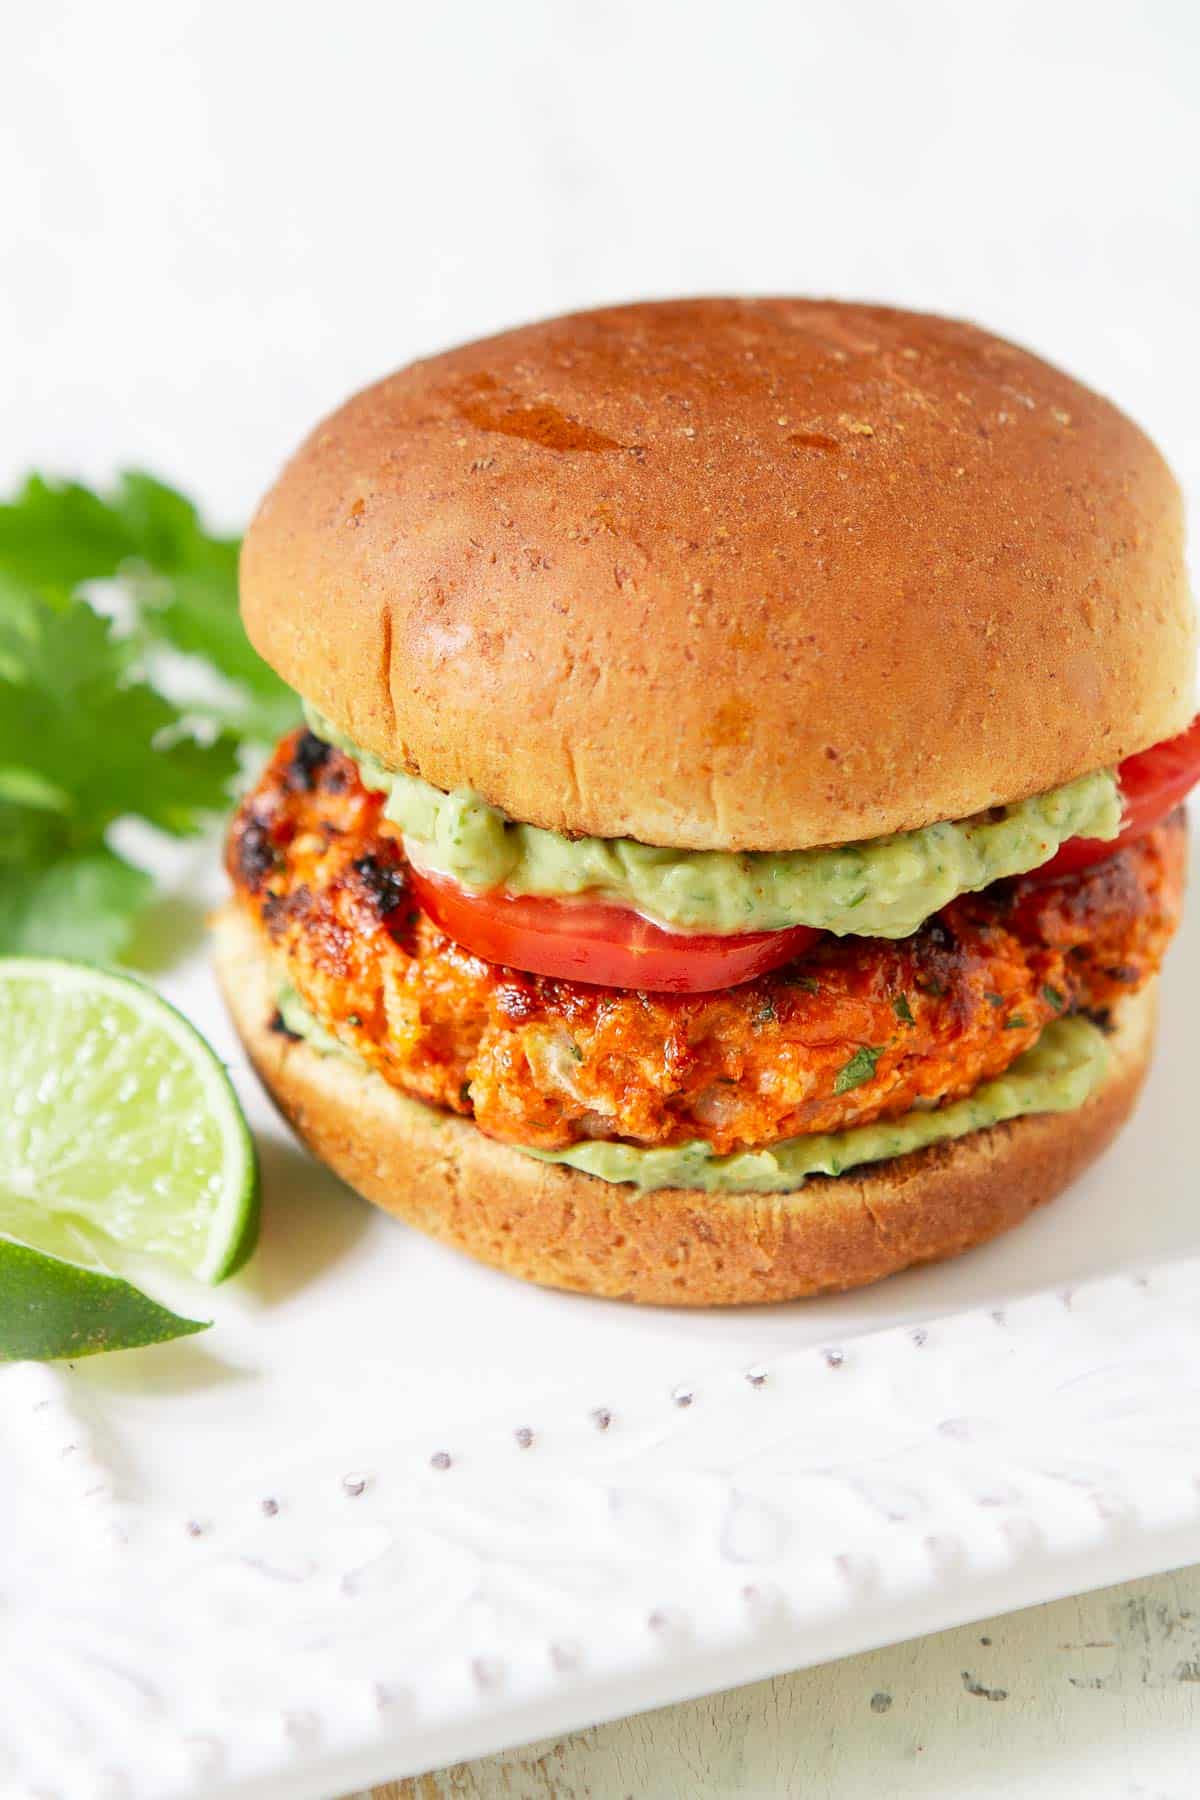 Grilled salmon patty on a bun with avocado sauce and tomato.